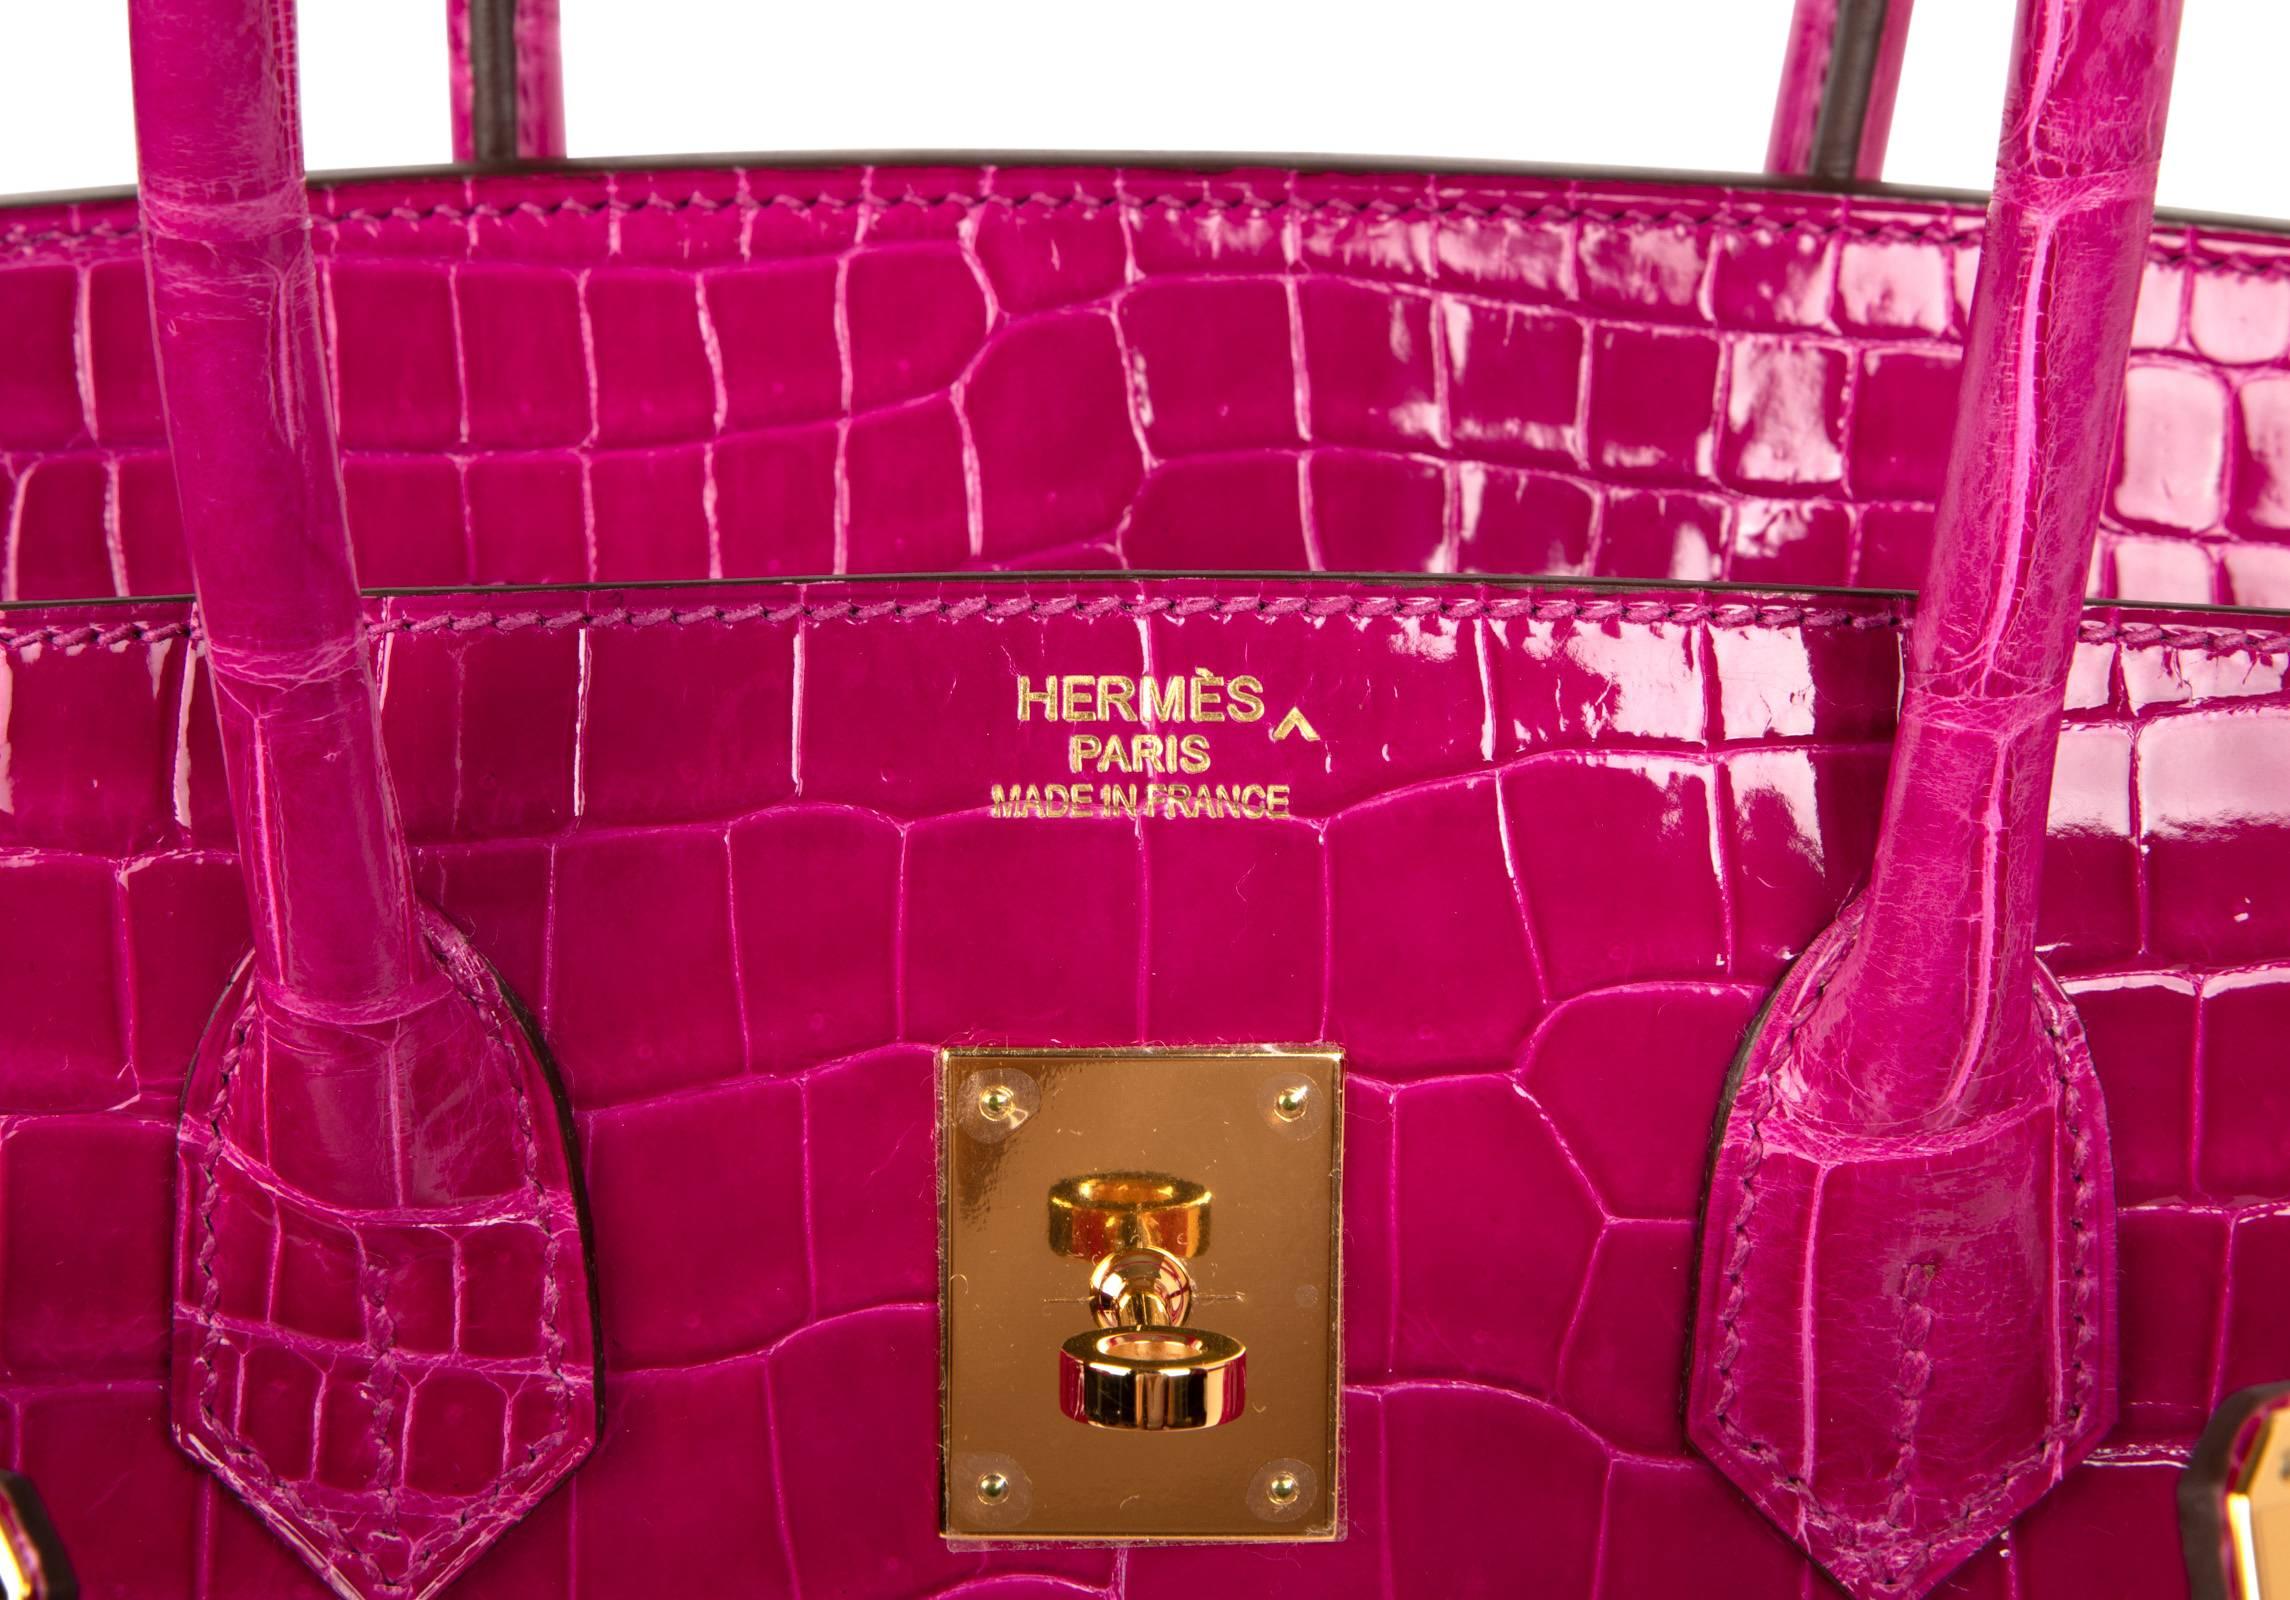 Guaranteed authentic 35 Hermes Birkin Pink Rose Scheherazade Porosus Crocodile.
This Hermes Birkin is breathtaking in its depth of color and beauty of scales.
Rich with gold hardware.
Comes with lock, keys, clochette, sleepers, raincoat and